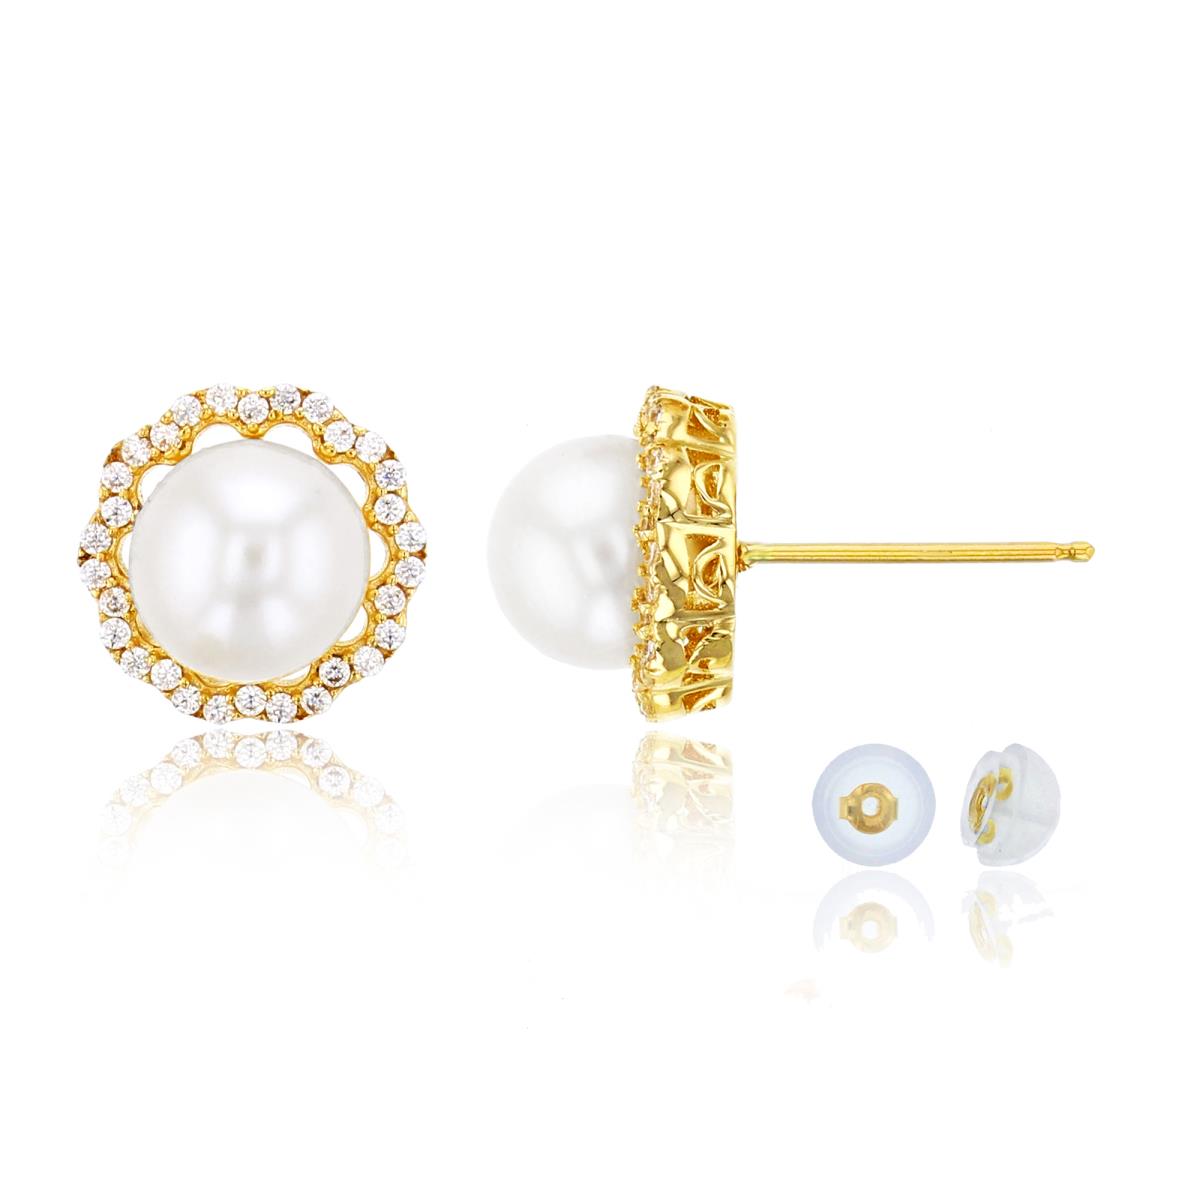 10K Yellow Gold 0.18 CTTW Rnd Diamonds & 6mm Pearls Studs with Silicone Backs